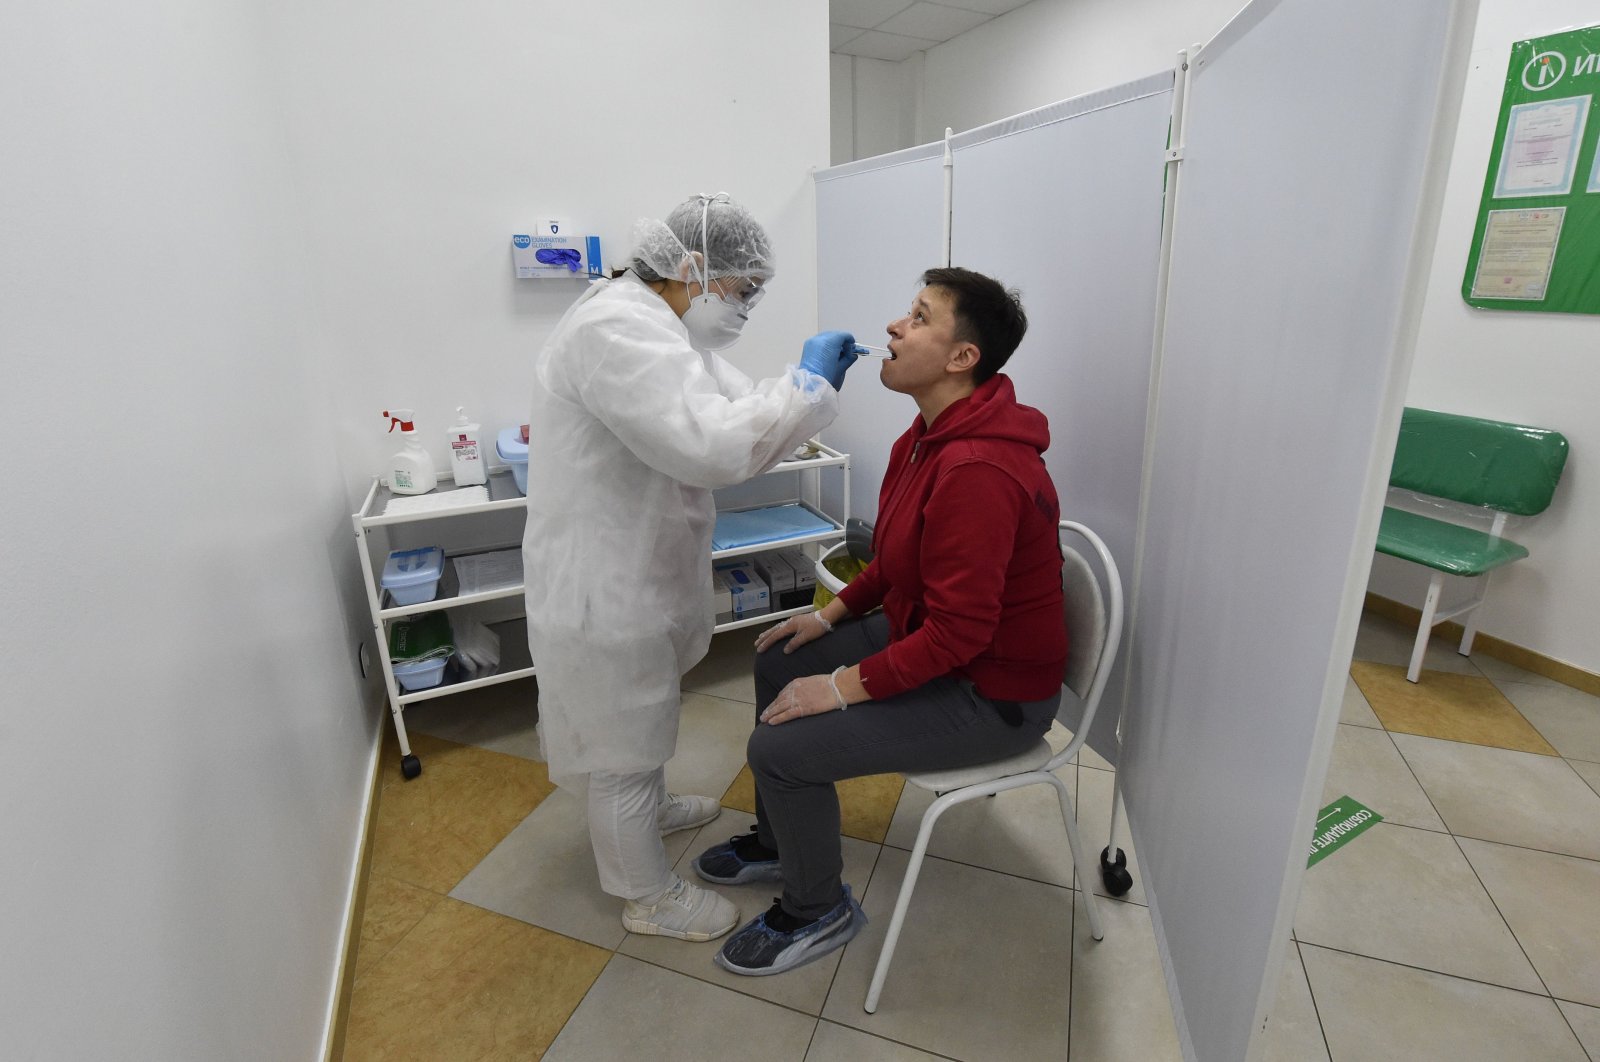 A medical staff member of Gemotest wearing protective gear, glasses and a face mask takes a saliva sample from a man at a drive-in COVID-19 testing facility in Moscow amid the COVID-19 pandemic, May 2, 2020. (AFP Photo)